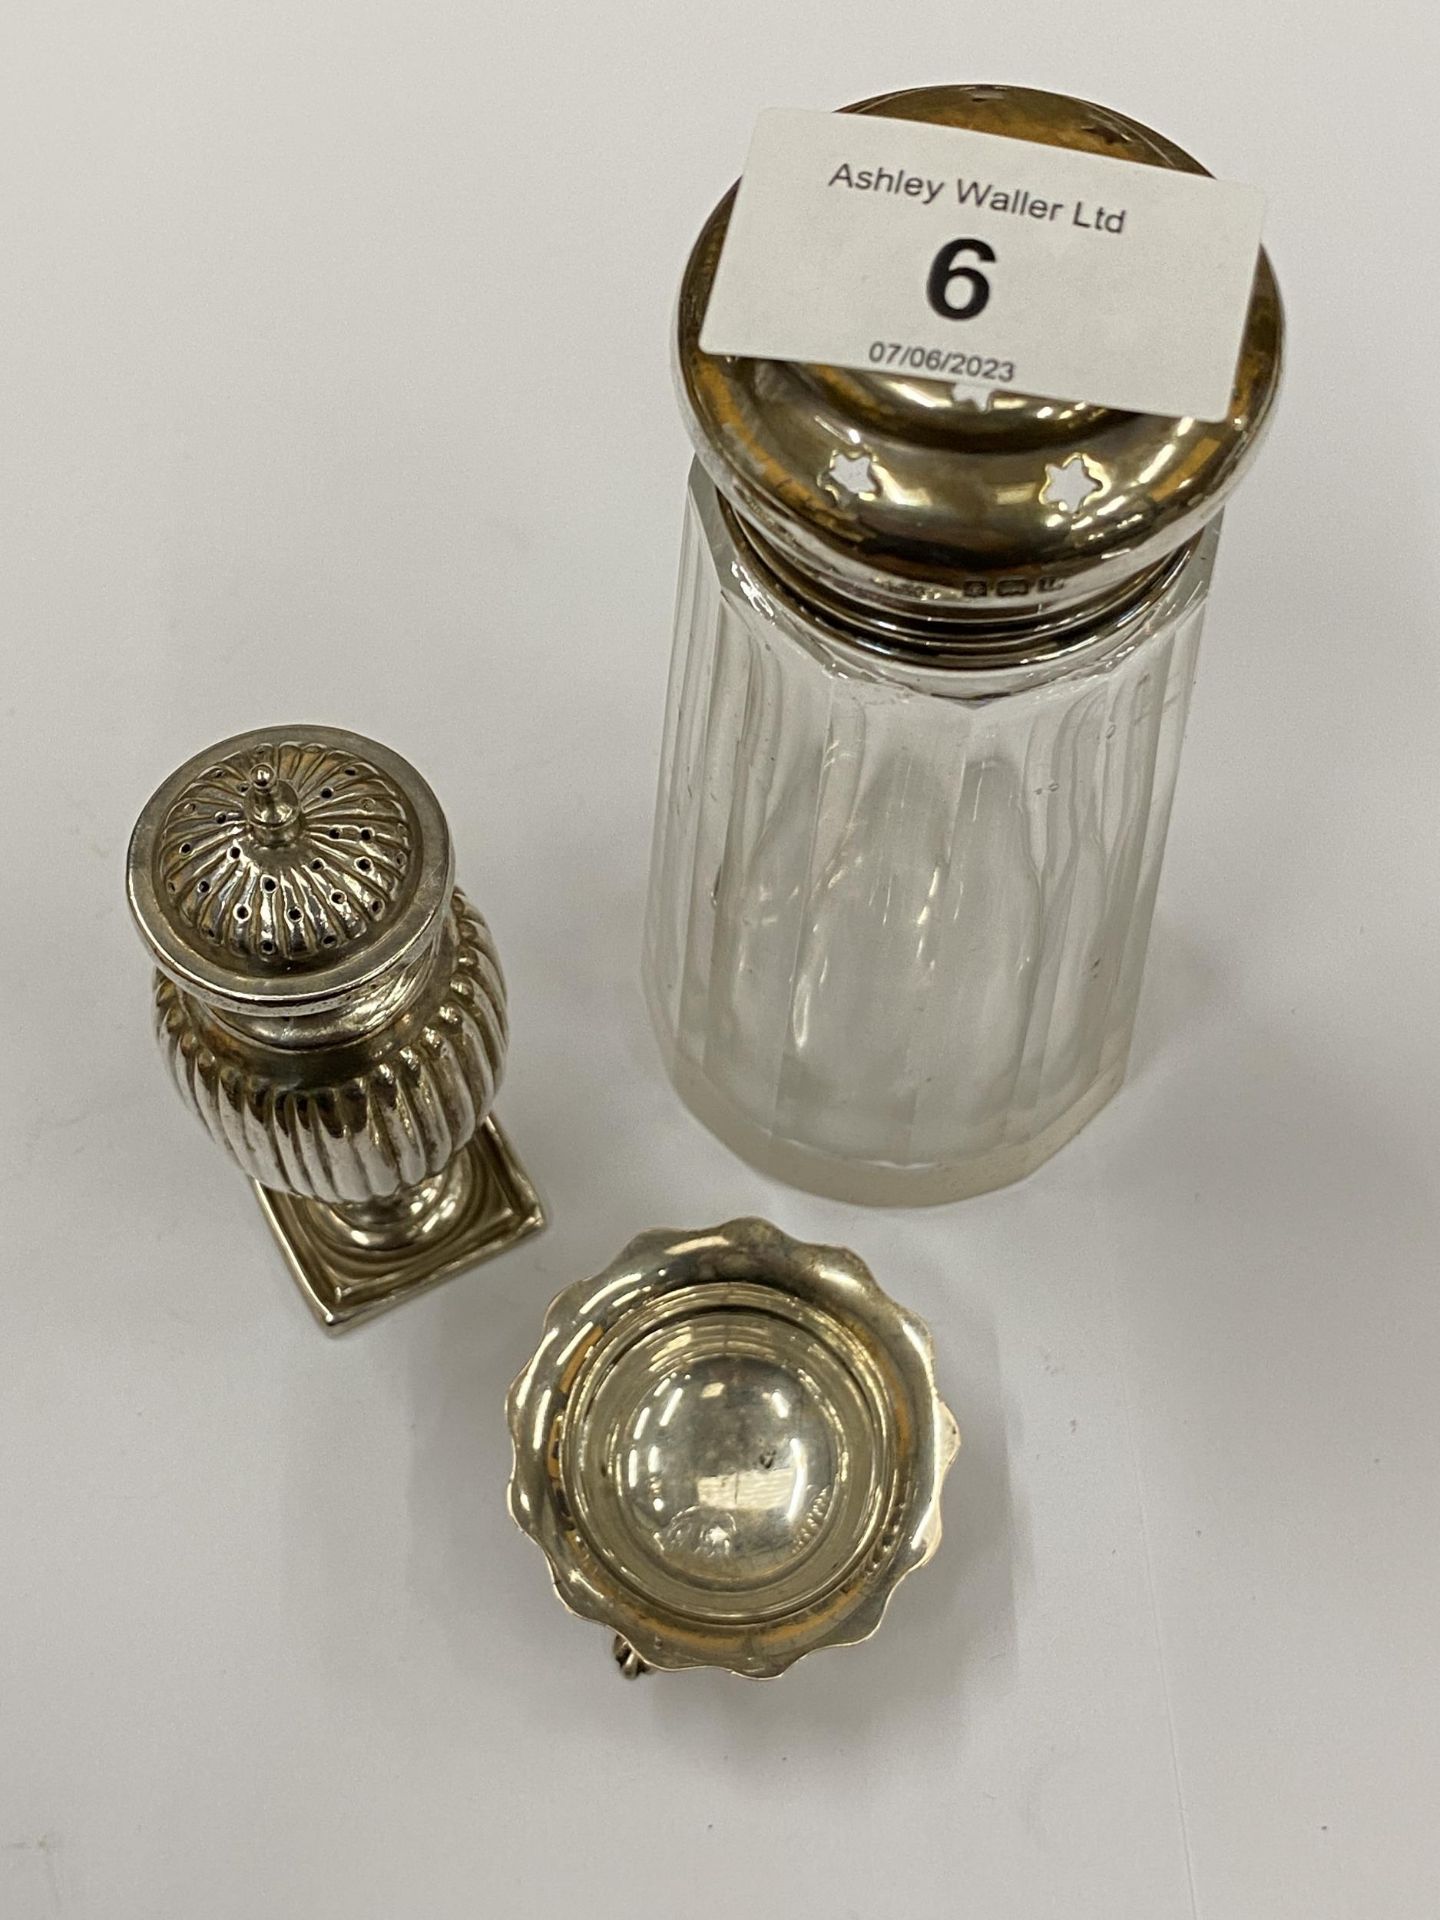 THREE SILVER ITEMS - HALLMARKED PEPPERETTE, OPEN SALT AND SILVER TOPPED SUGAR SIFTER